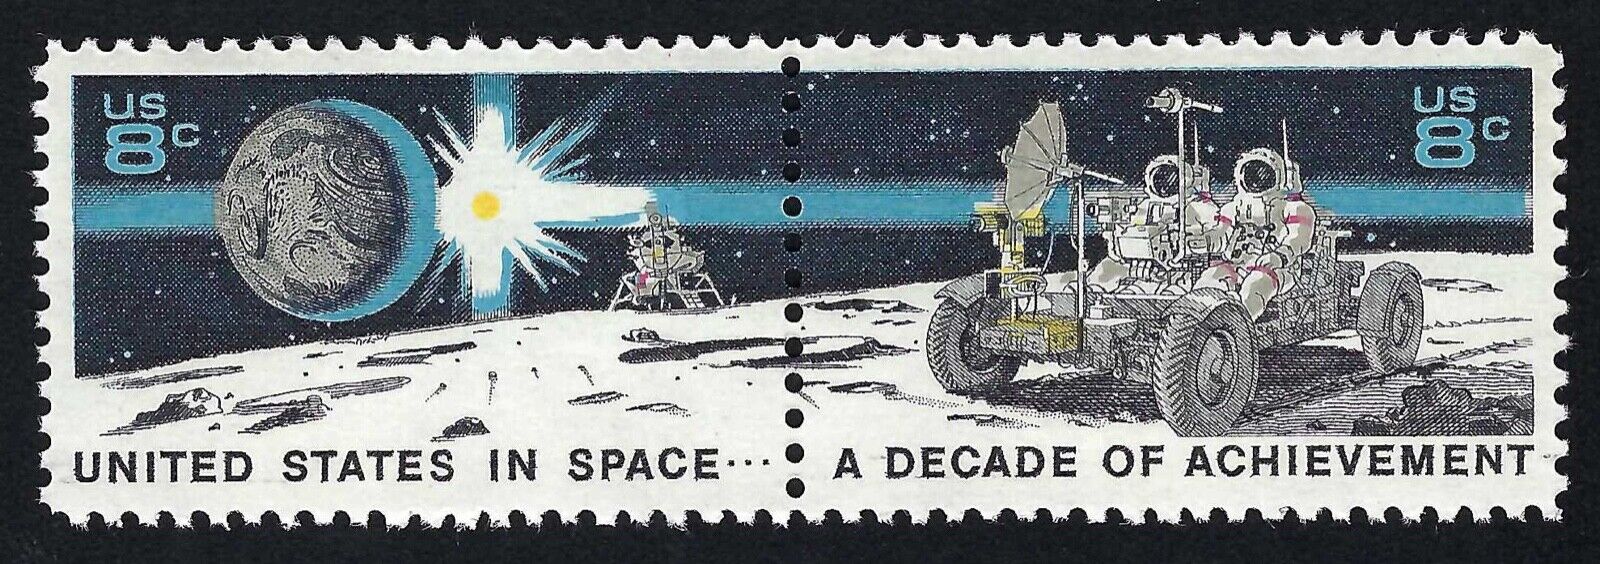 Apollo 15 Lunar Rover Moon Exploration Earth Astronaut Paired Space Stamps MINT